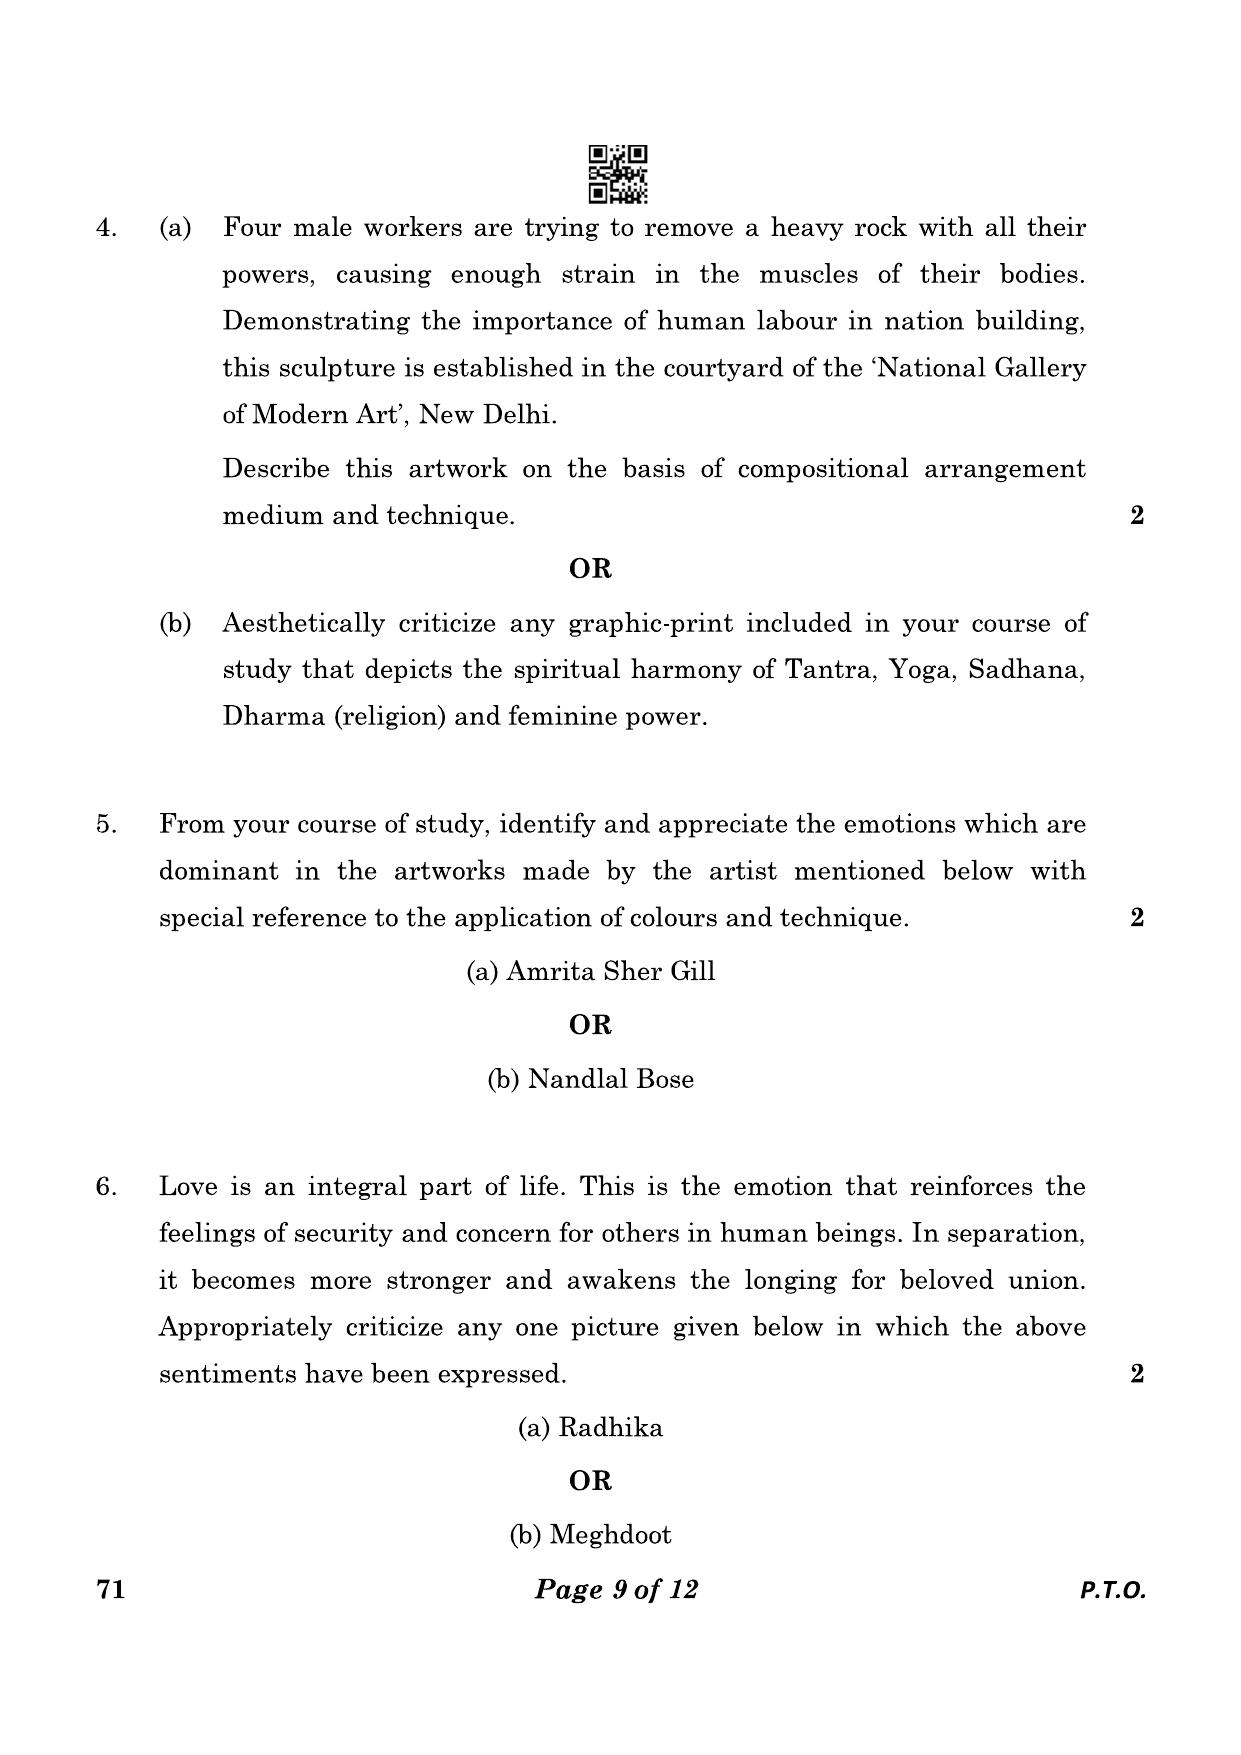 CBSE Class 12 71_Painting 2023 Question Paper - Page 9